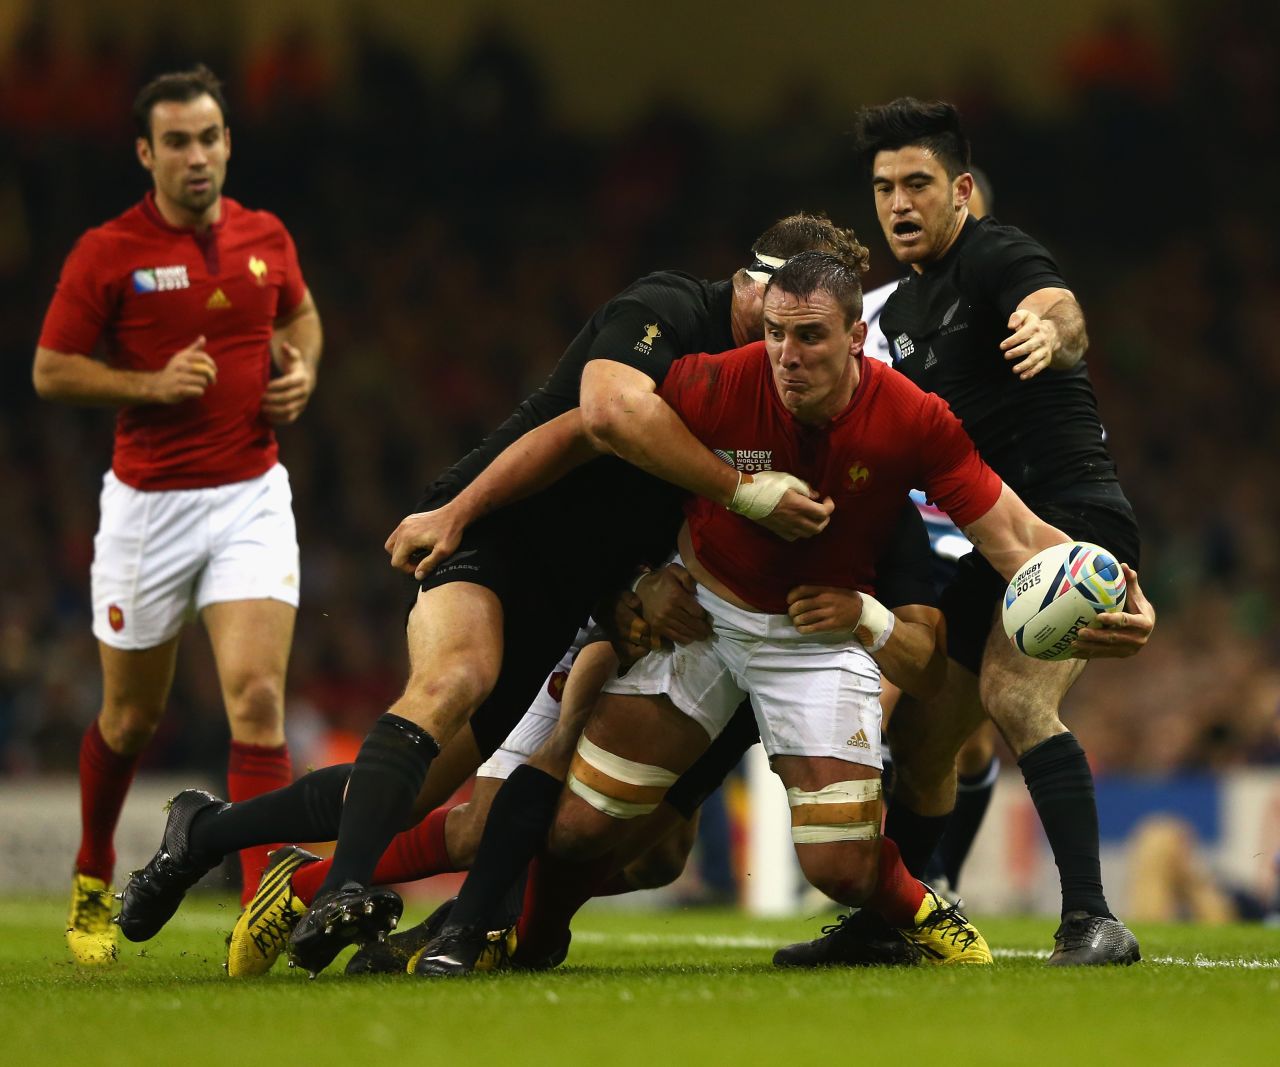 Louis Picamoles of France is tackled by Wyatt Crockett of the New Zealand All Blacks (L) and Nehe Milner-Skudder of New Zealand.